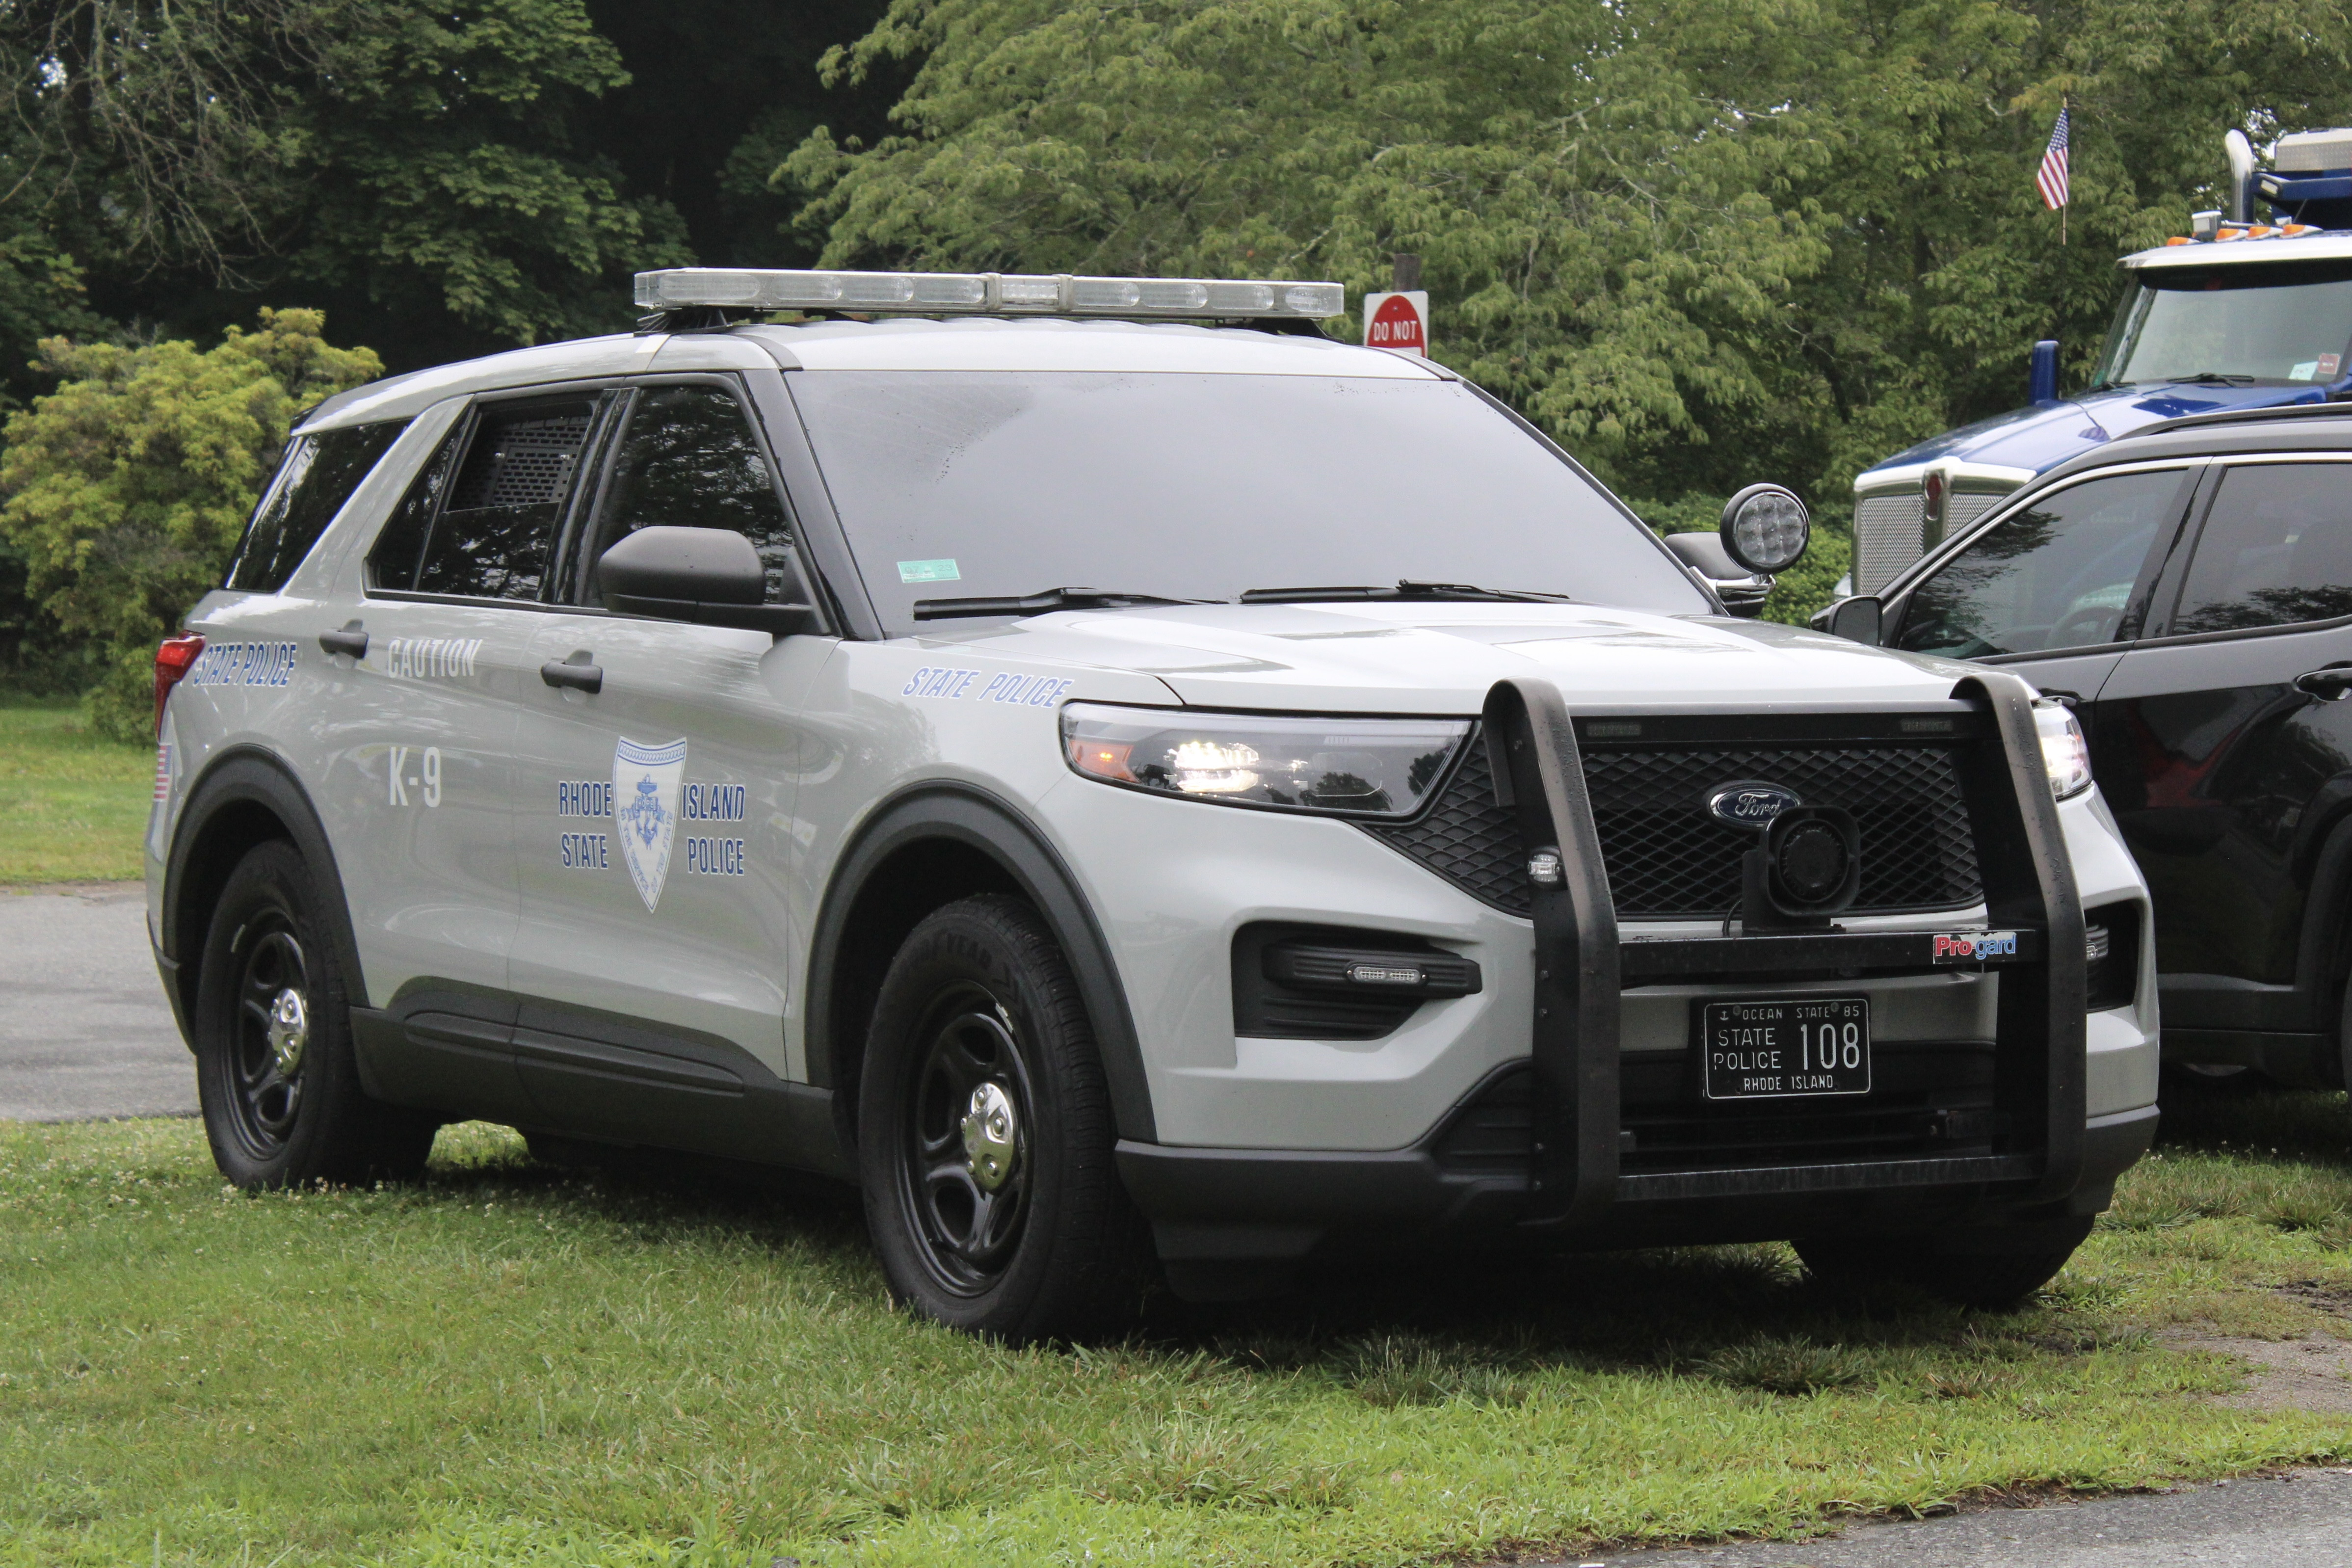 A photo  of Rhode Island State Police
            Cruiser 108, a 2020 Ford Police Interceptor Utility             taken by @riemergencyvehicles